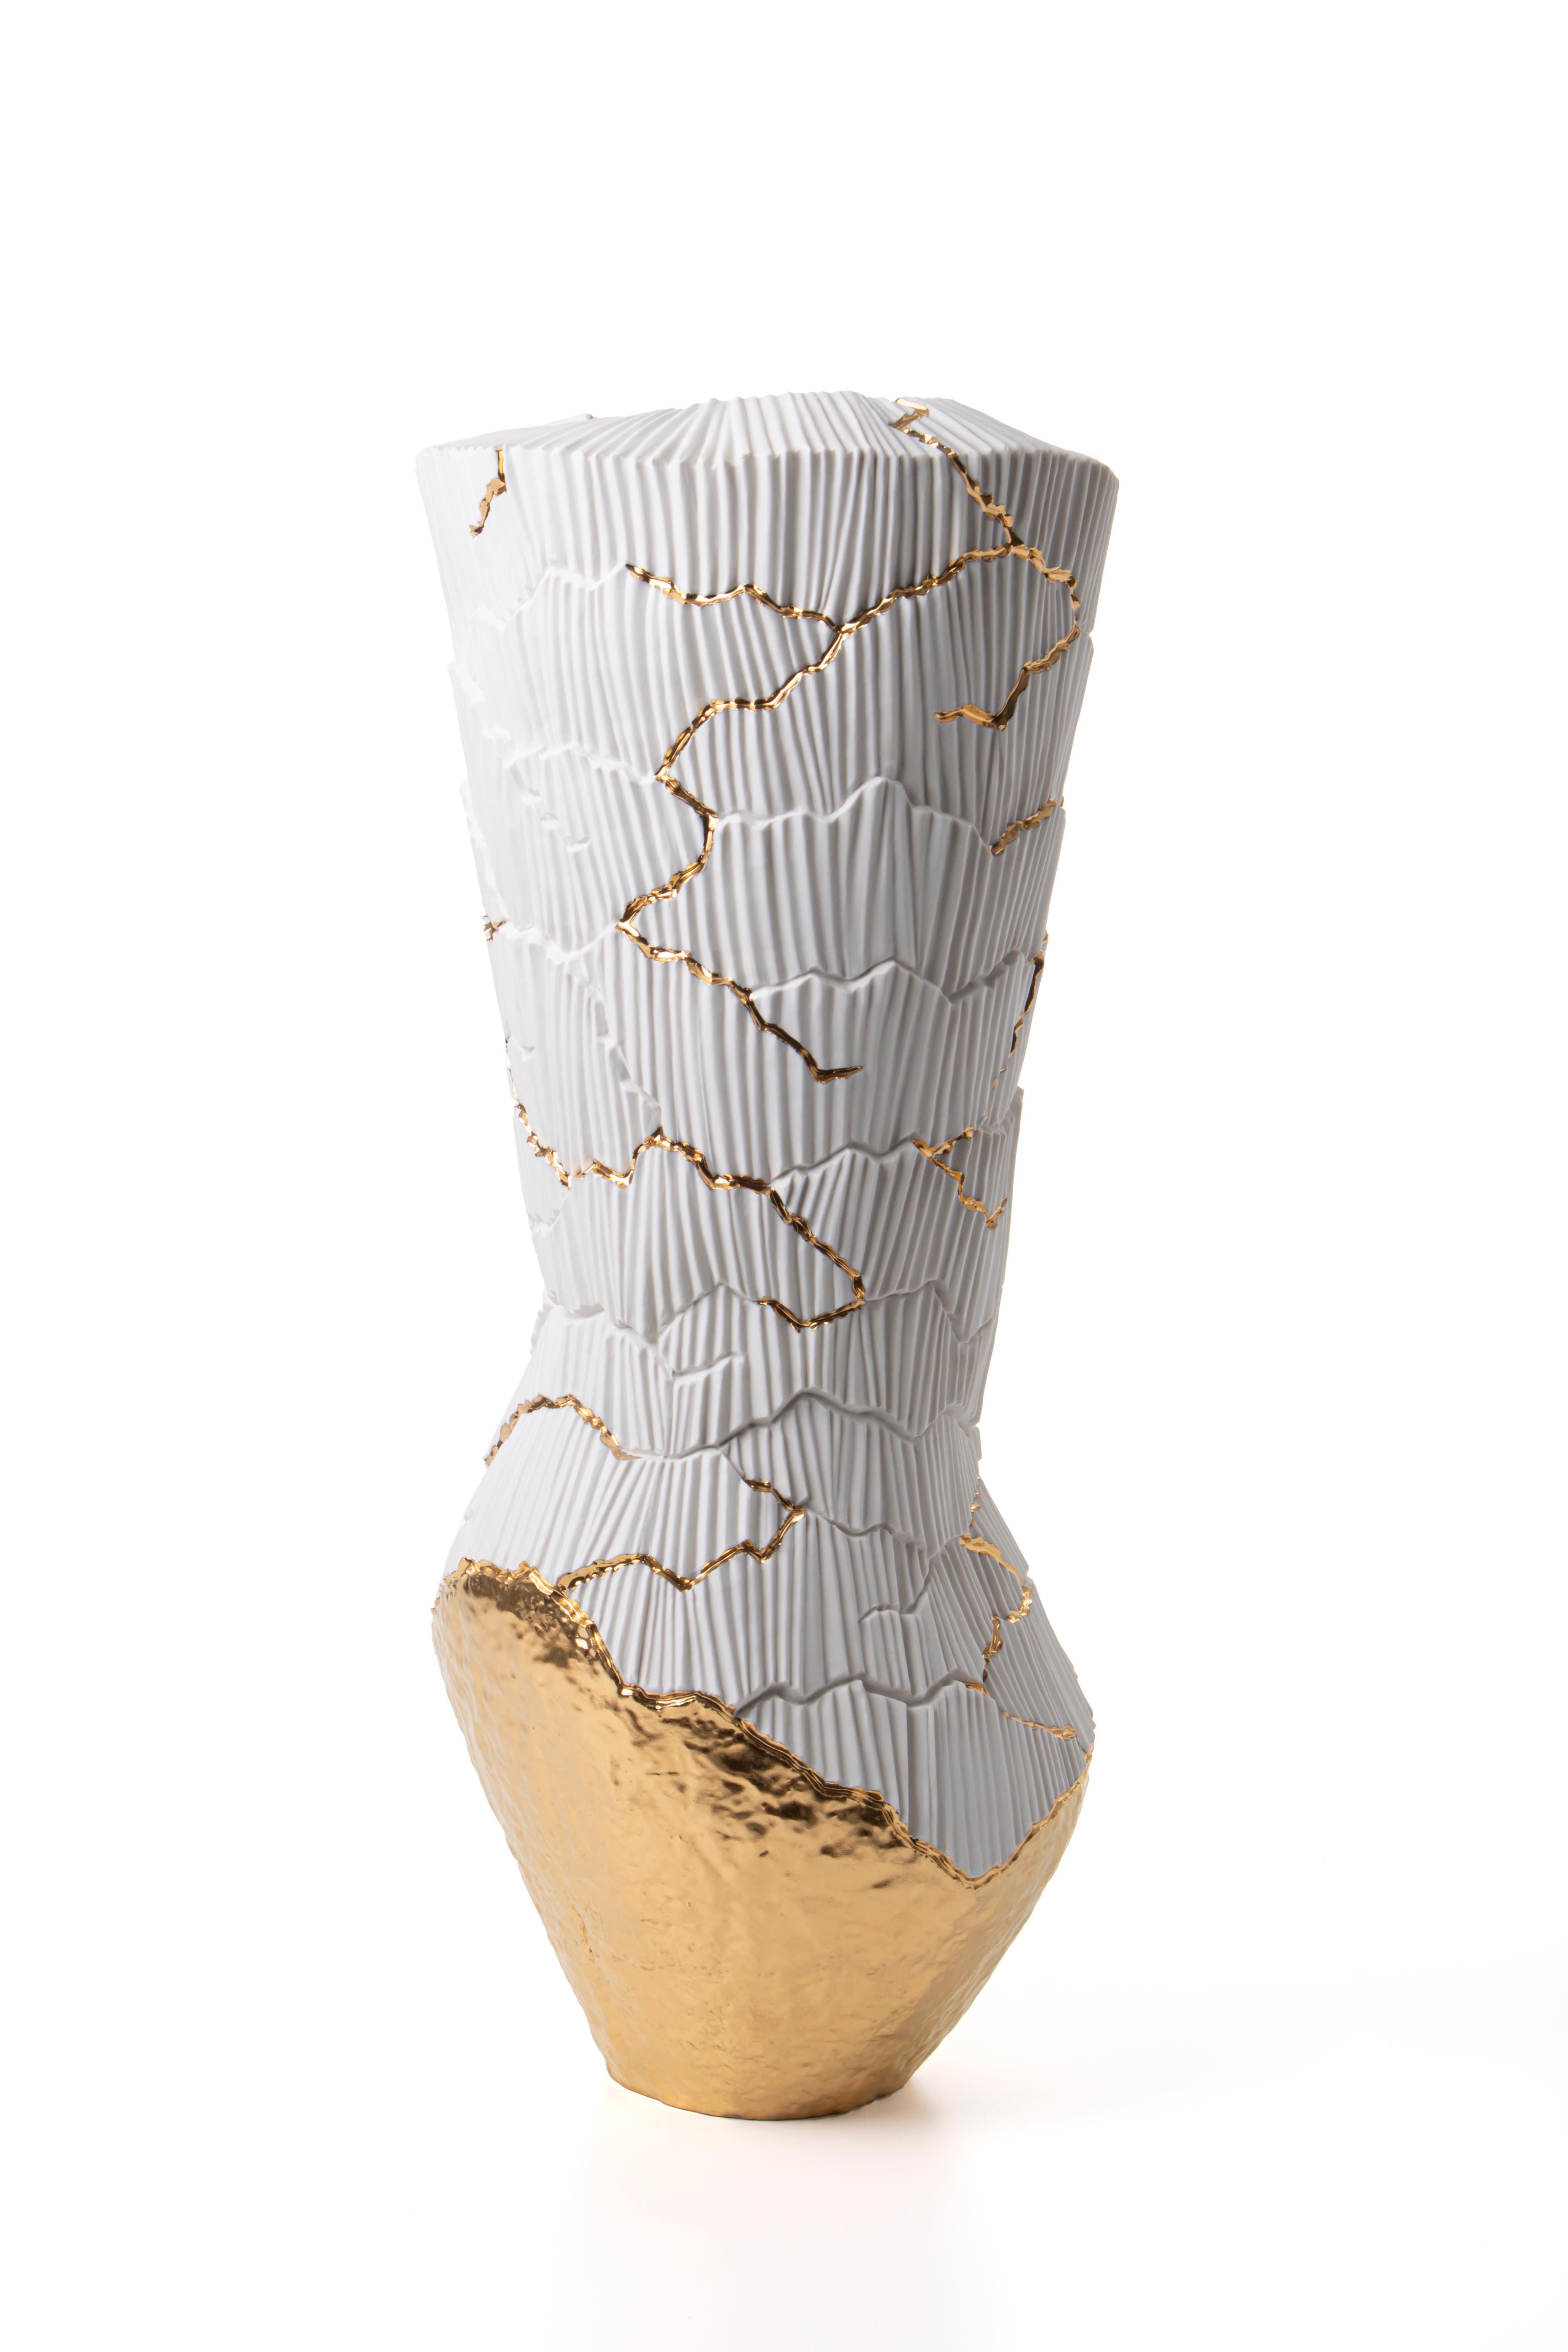 Italian Contemporary Porcelain Tall Vase Gold Kintsugi White Ceramic Hand-Painted Fos For Sale